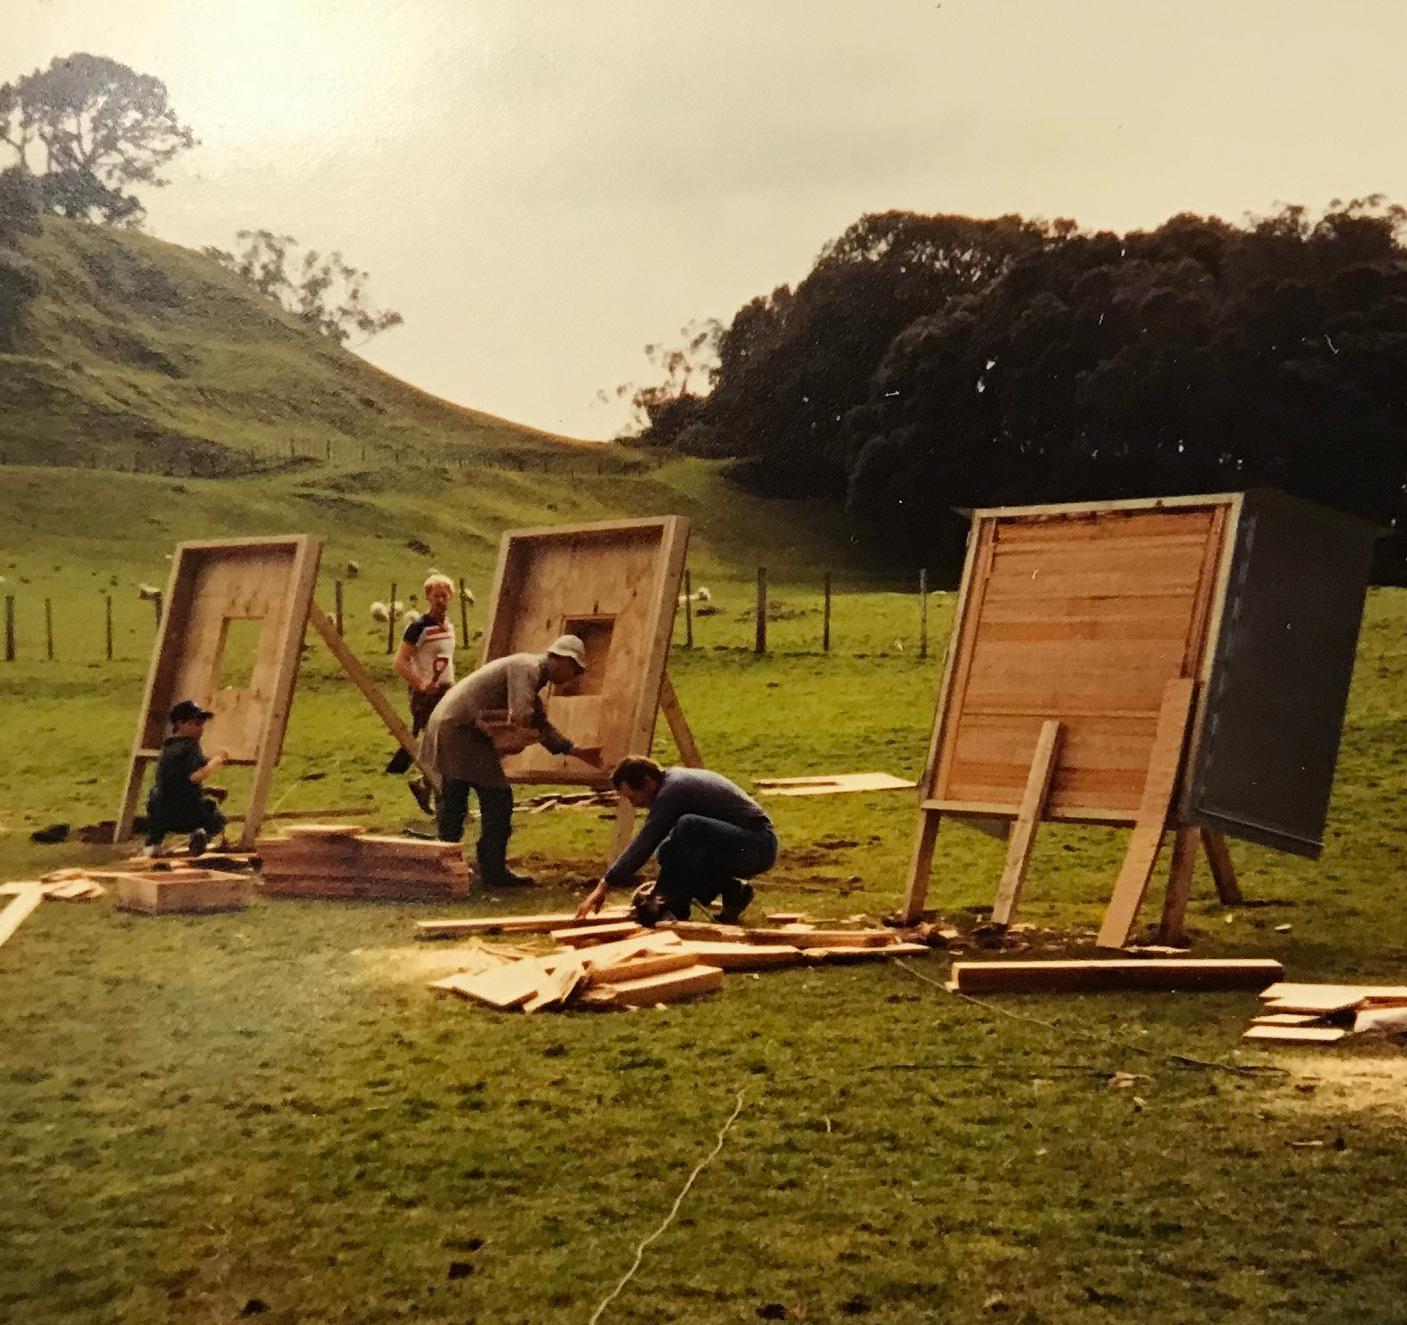 Building targets in the 1980s